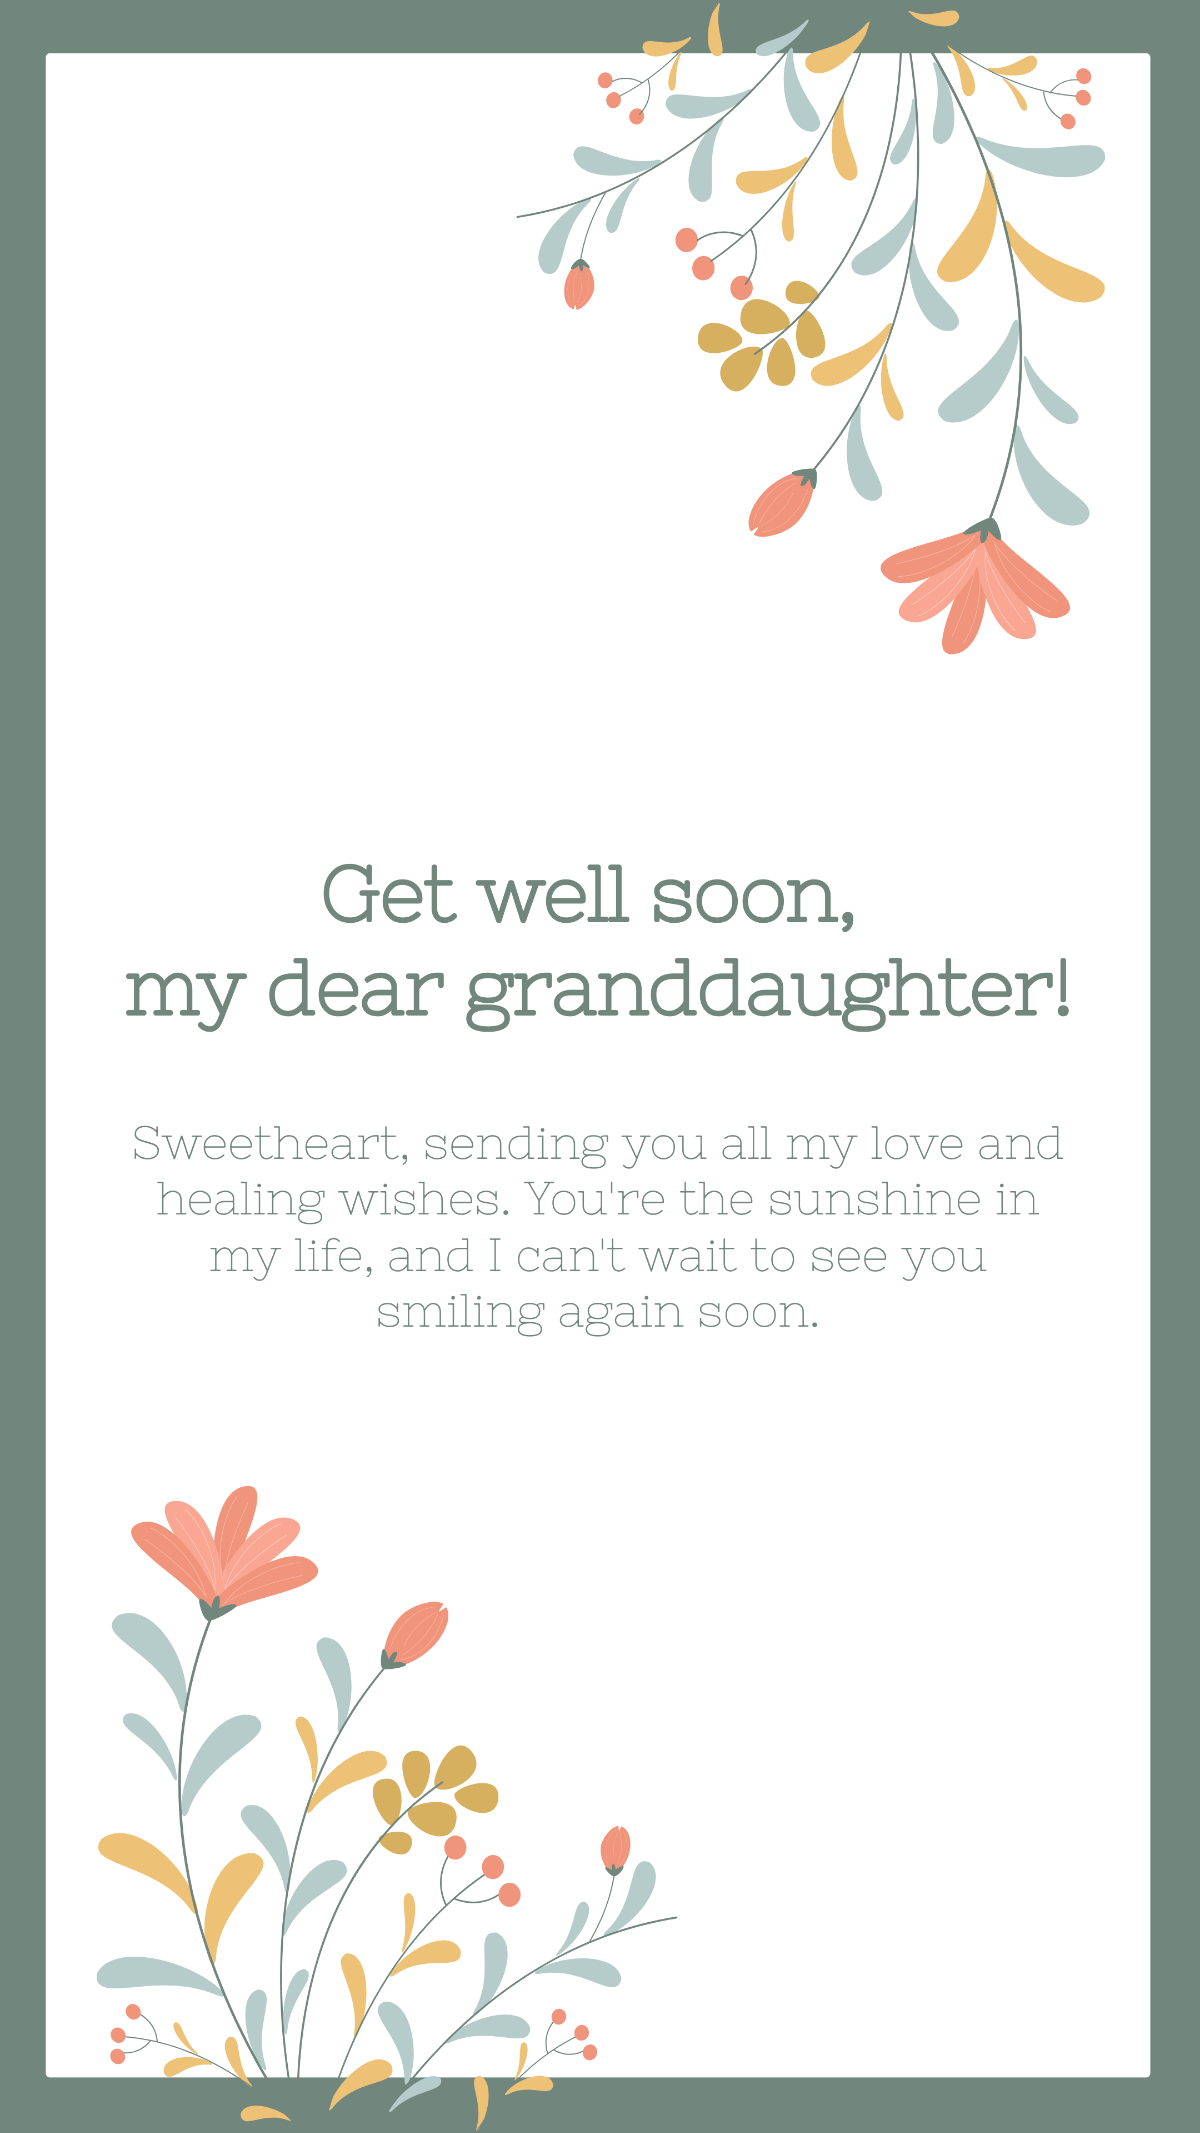 Get Well Soon Message For Granddaughter